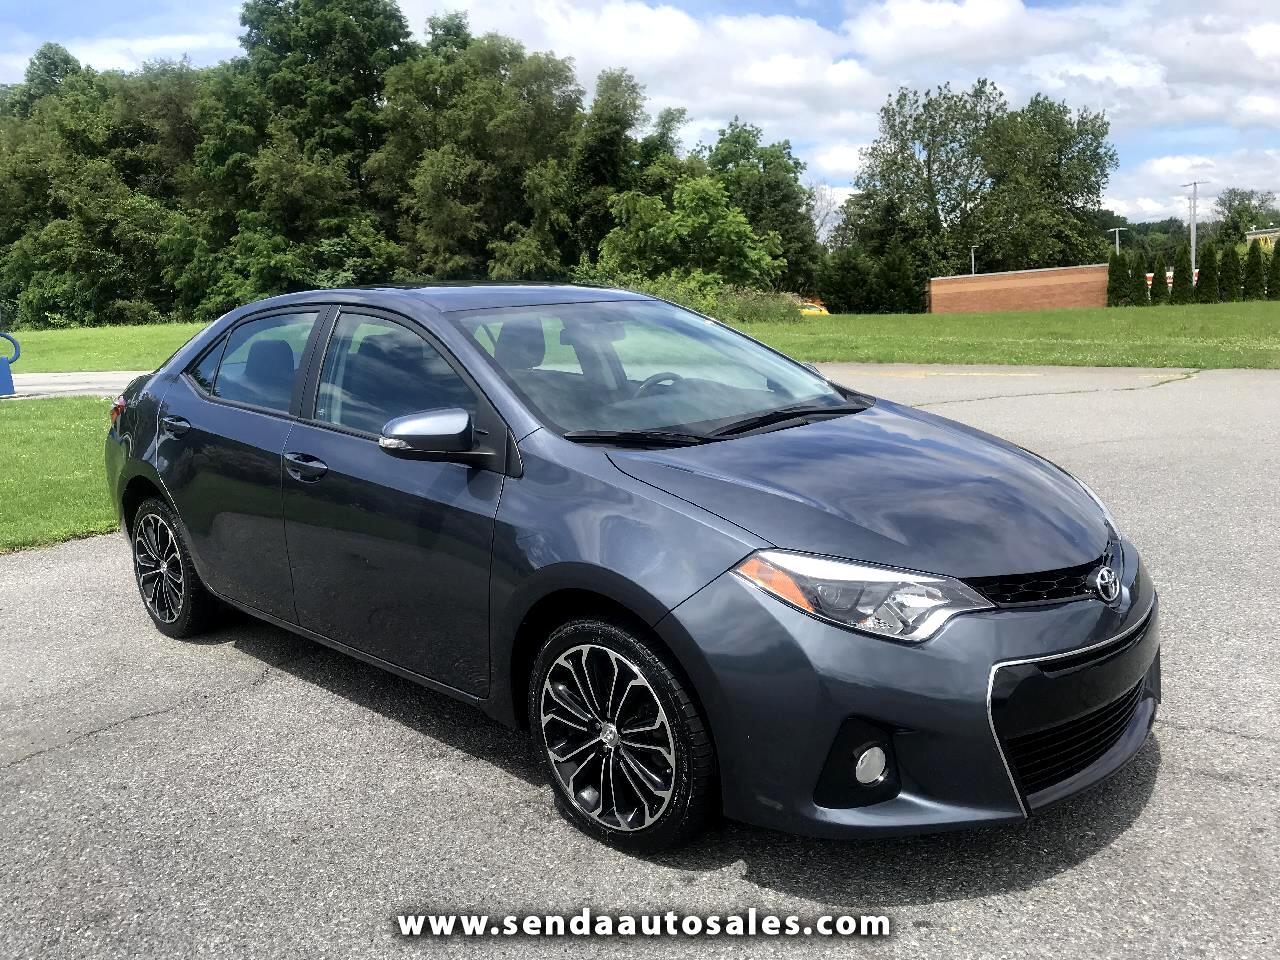 Used 2016 Toyota Corolla S Premium CVT for Sale in Reading PA 19601 ...